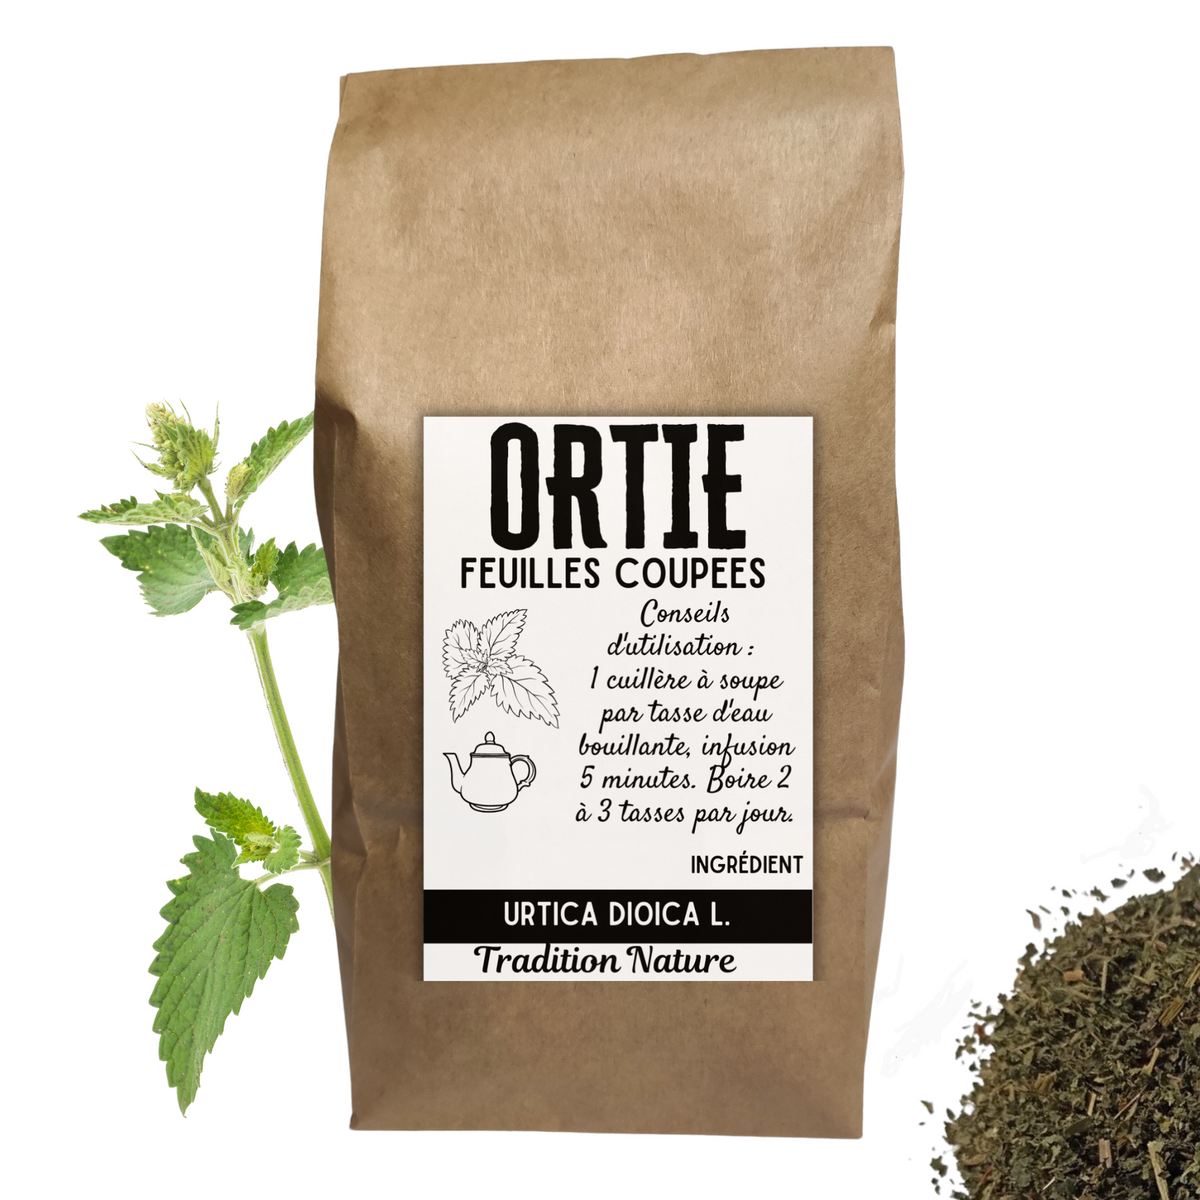 Ortie feuilles coupée tisane  Urtica dioica – Tradition Nature